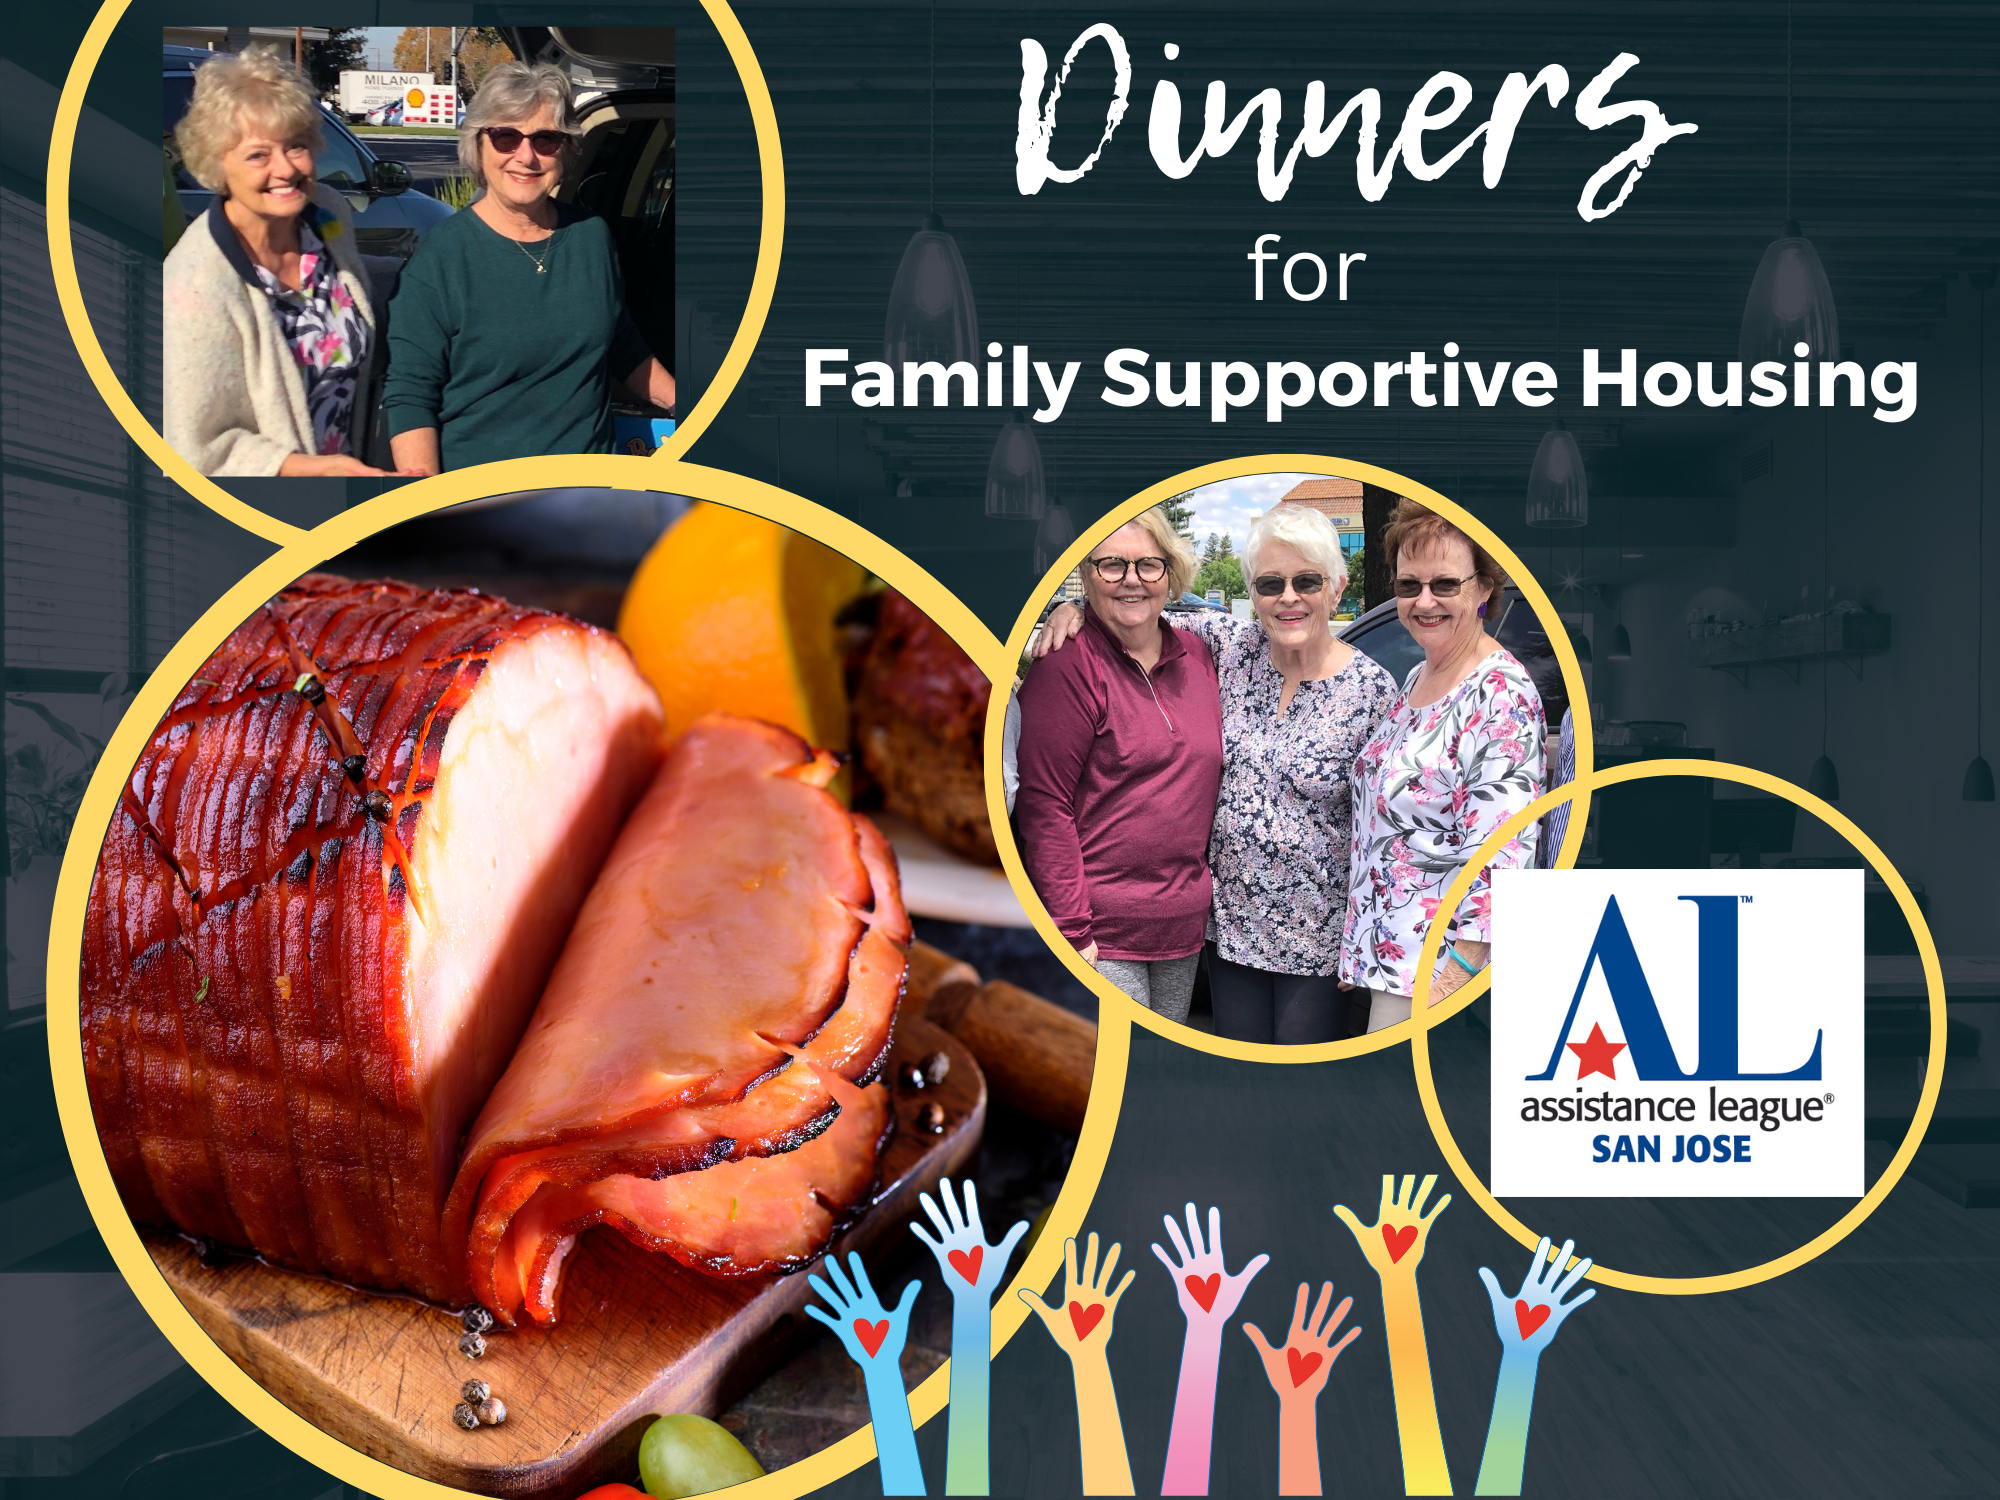 Dinners for Family Supportive Housing